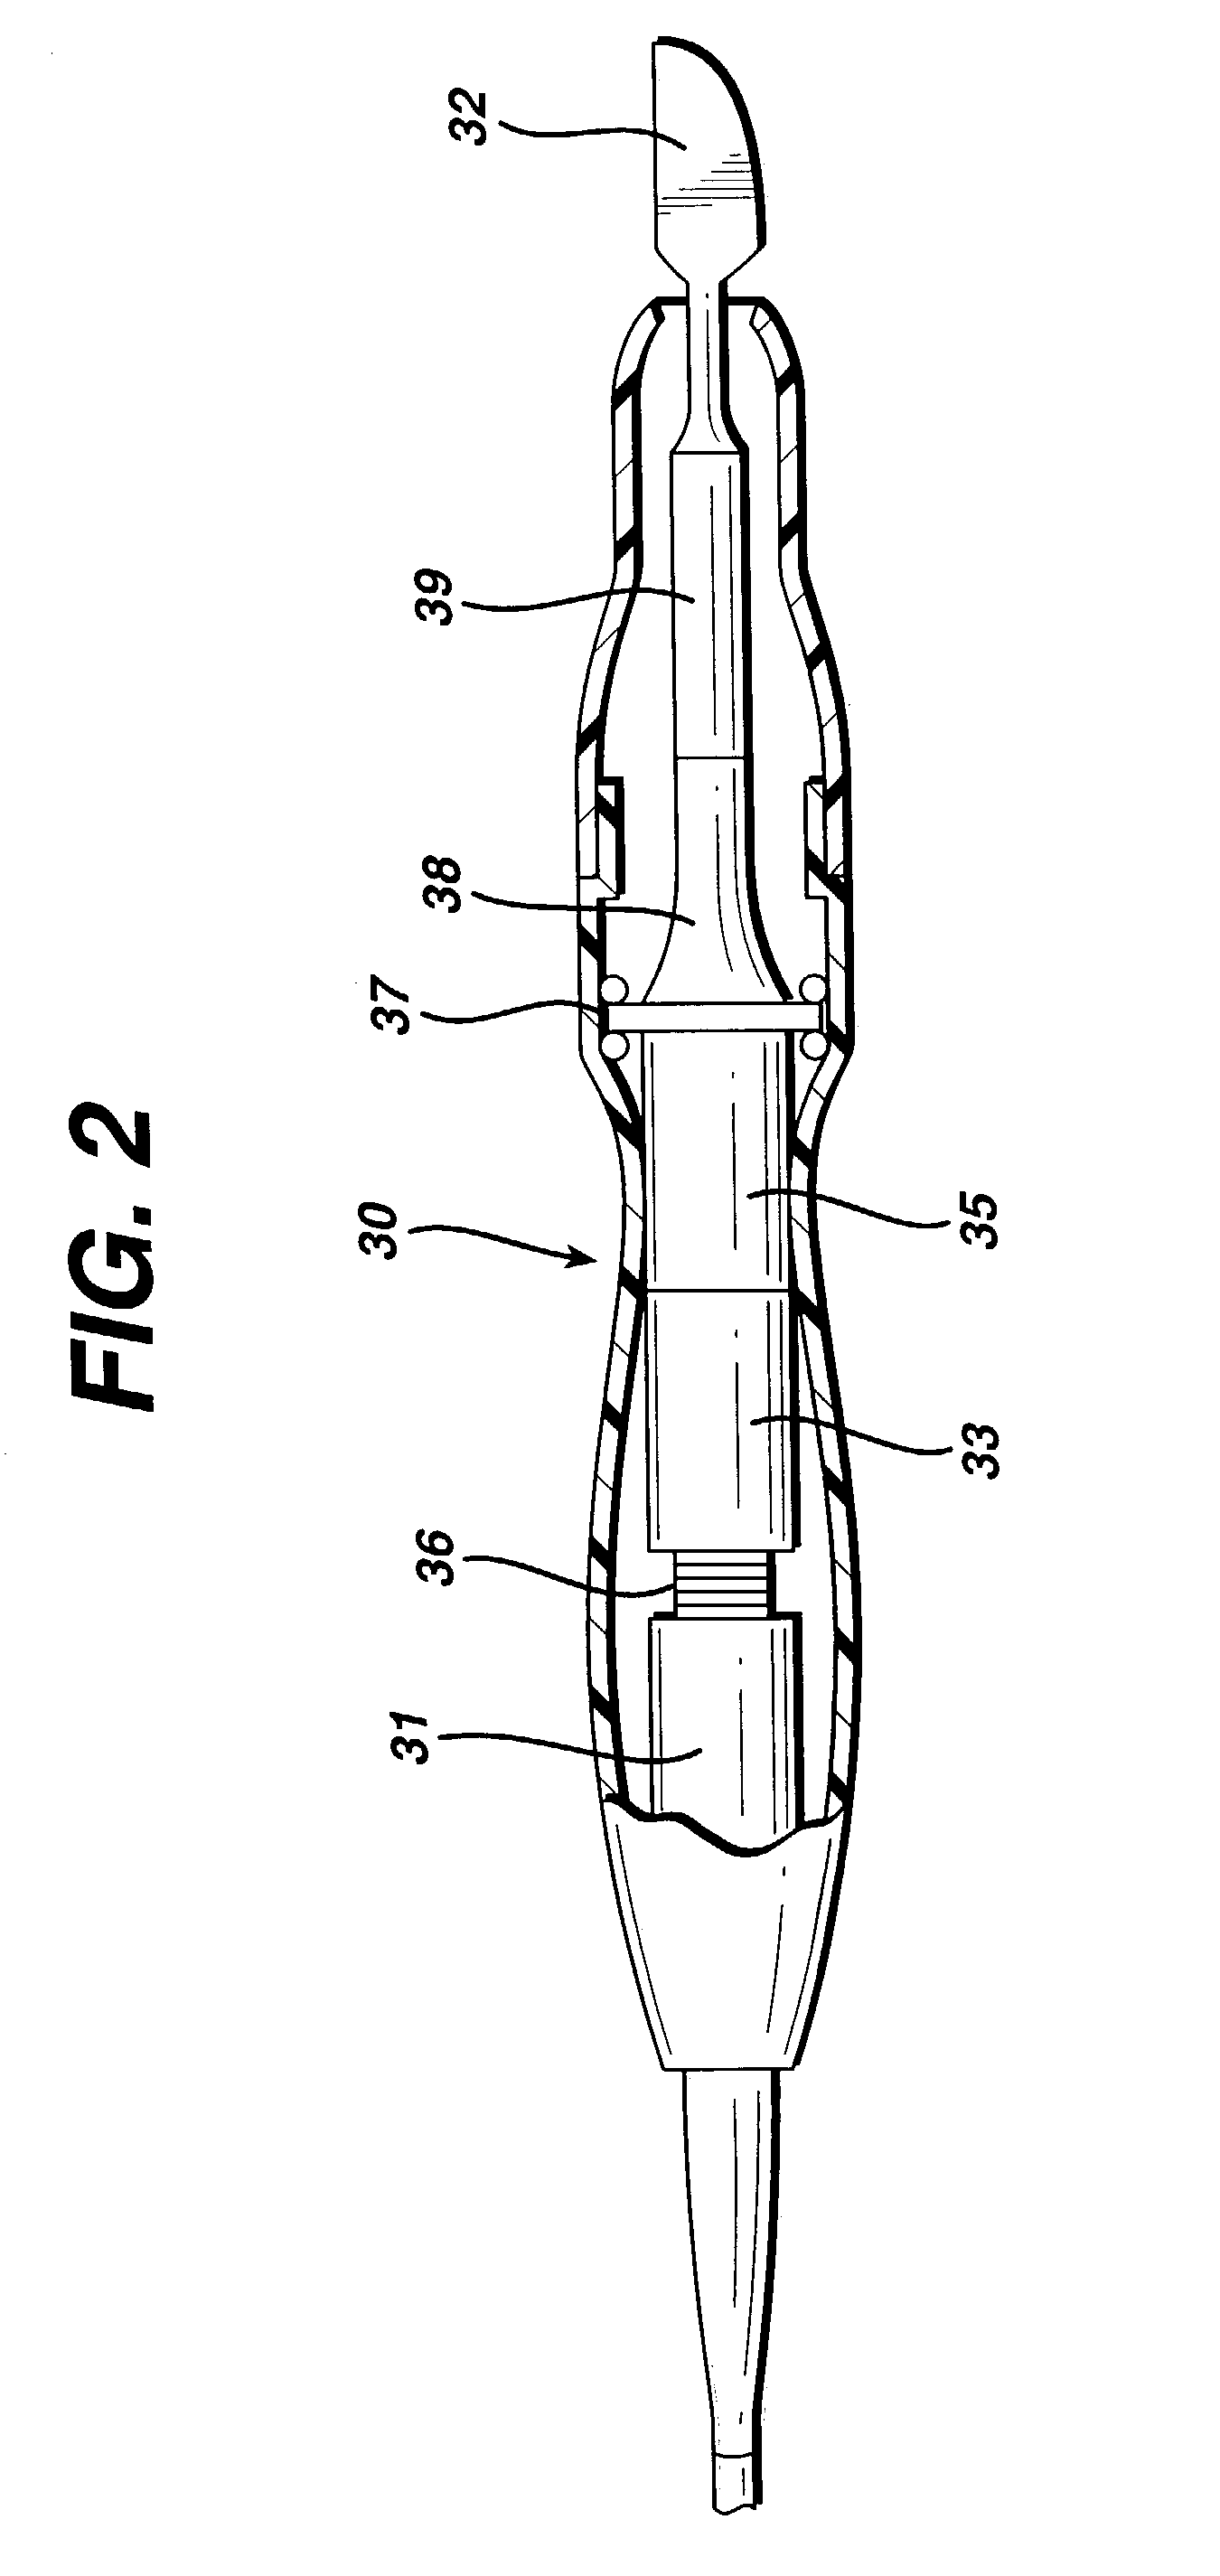 Method for driving an ultrasonic system to improve acquisition of blade resonance frequency at startup